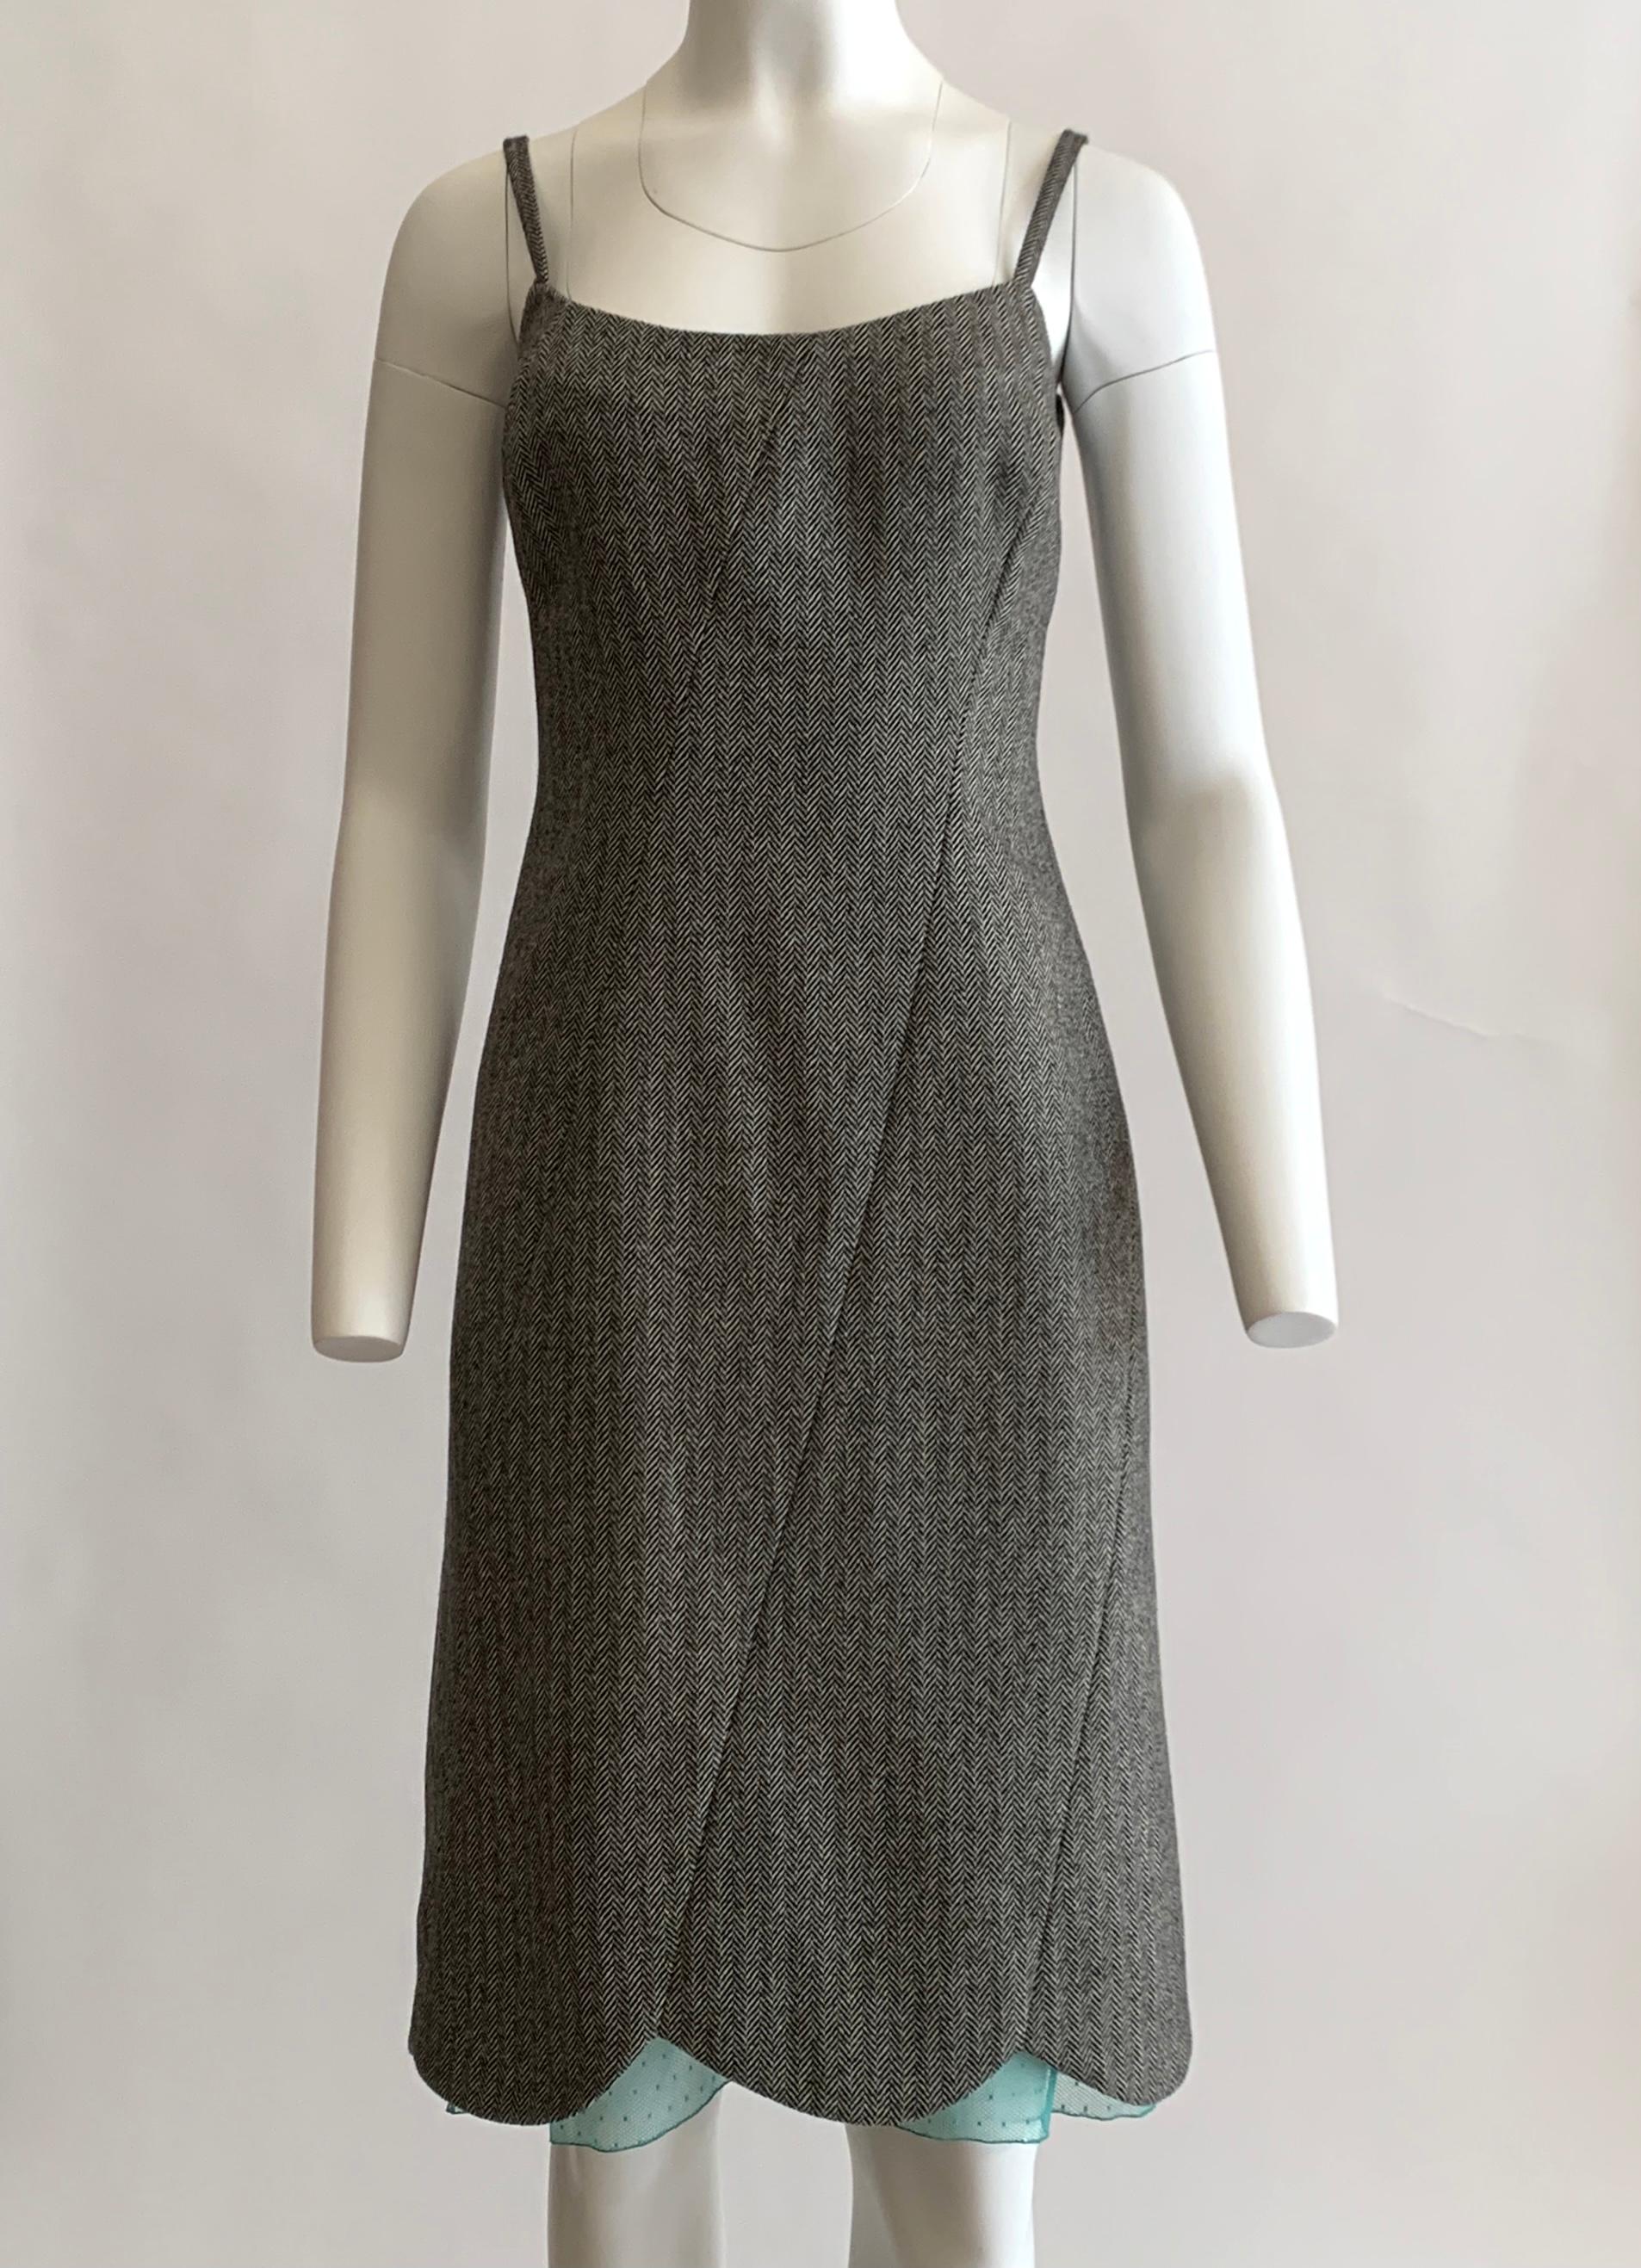 Vintage Gianni Versace Couture black and white  herringbone tweed dress. 90s slip dress style in an unexpected suiting fabric. Bright robin's egg blue lace peeks out from the scalloped hem and at back slit. Back zip follows diagonal seam. 

80%